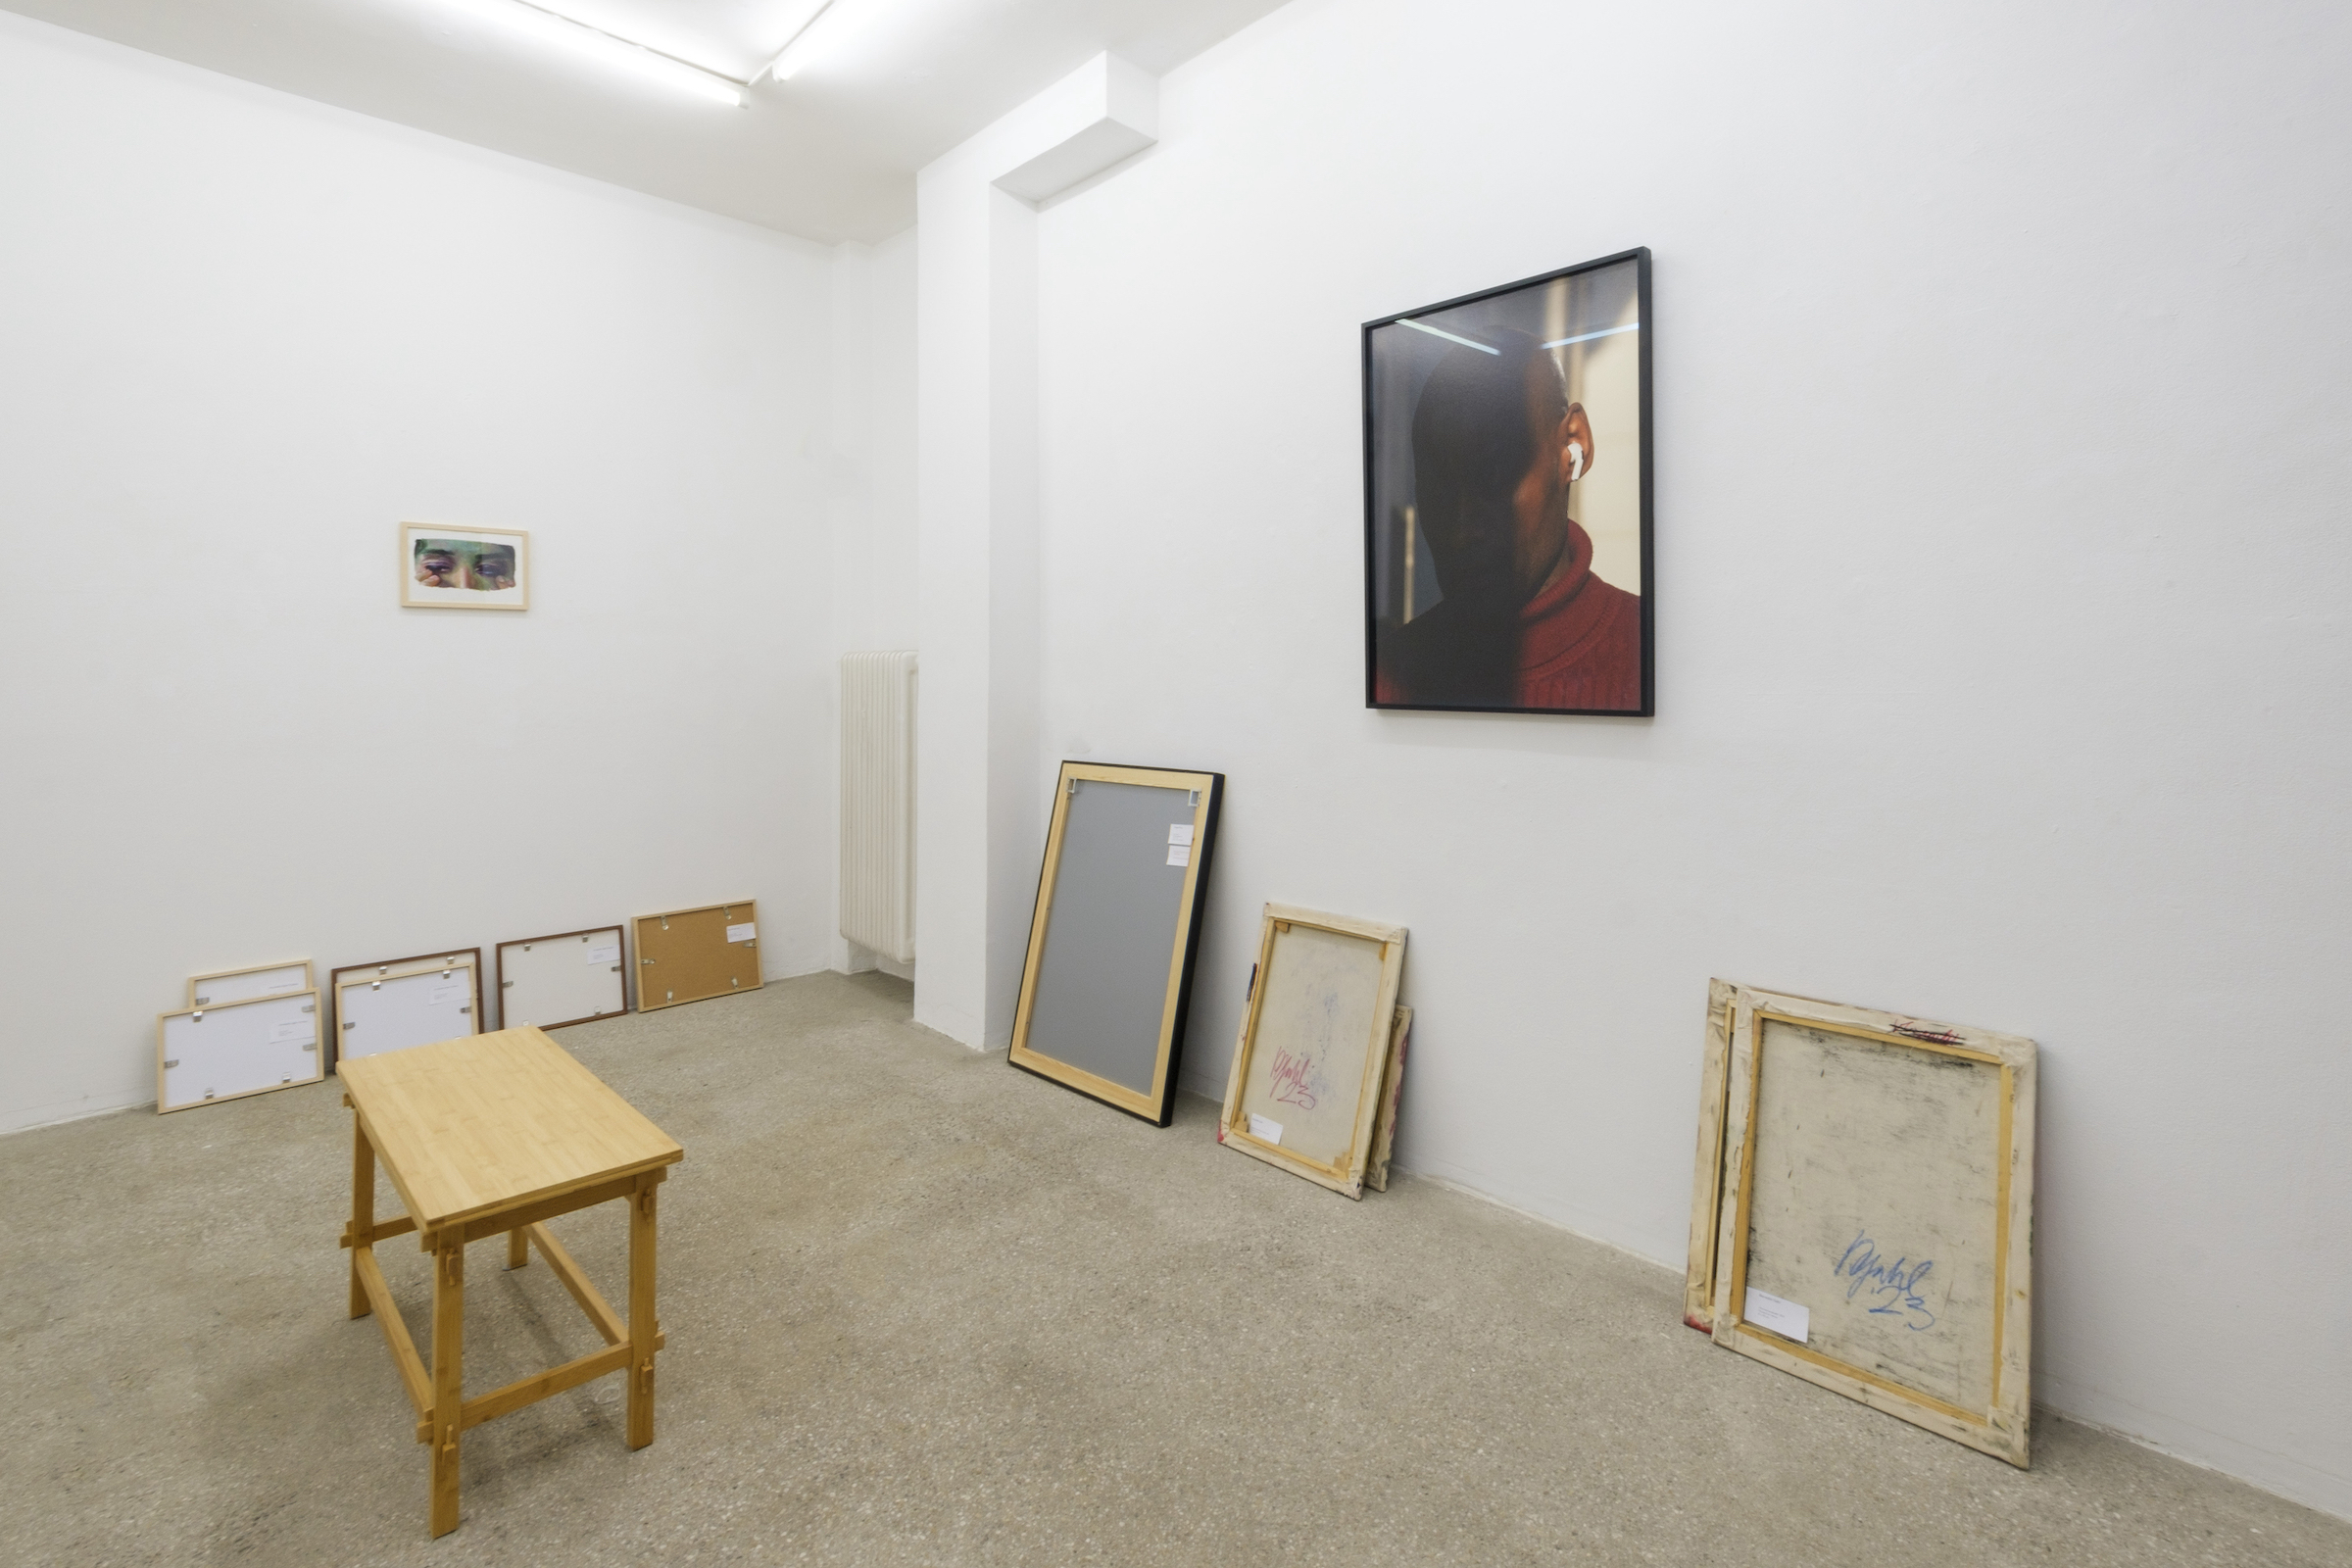 Installation view, "Self Service", with works by Yorgos Prinos and Annabelle Agbo Godeau